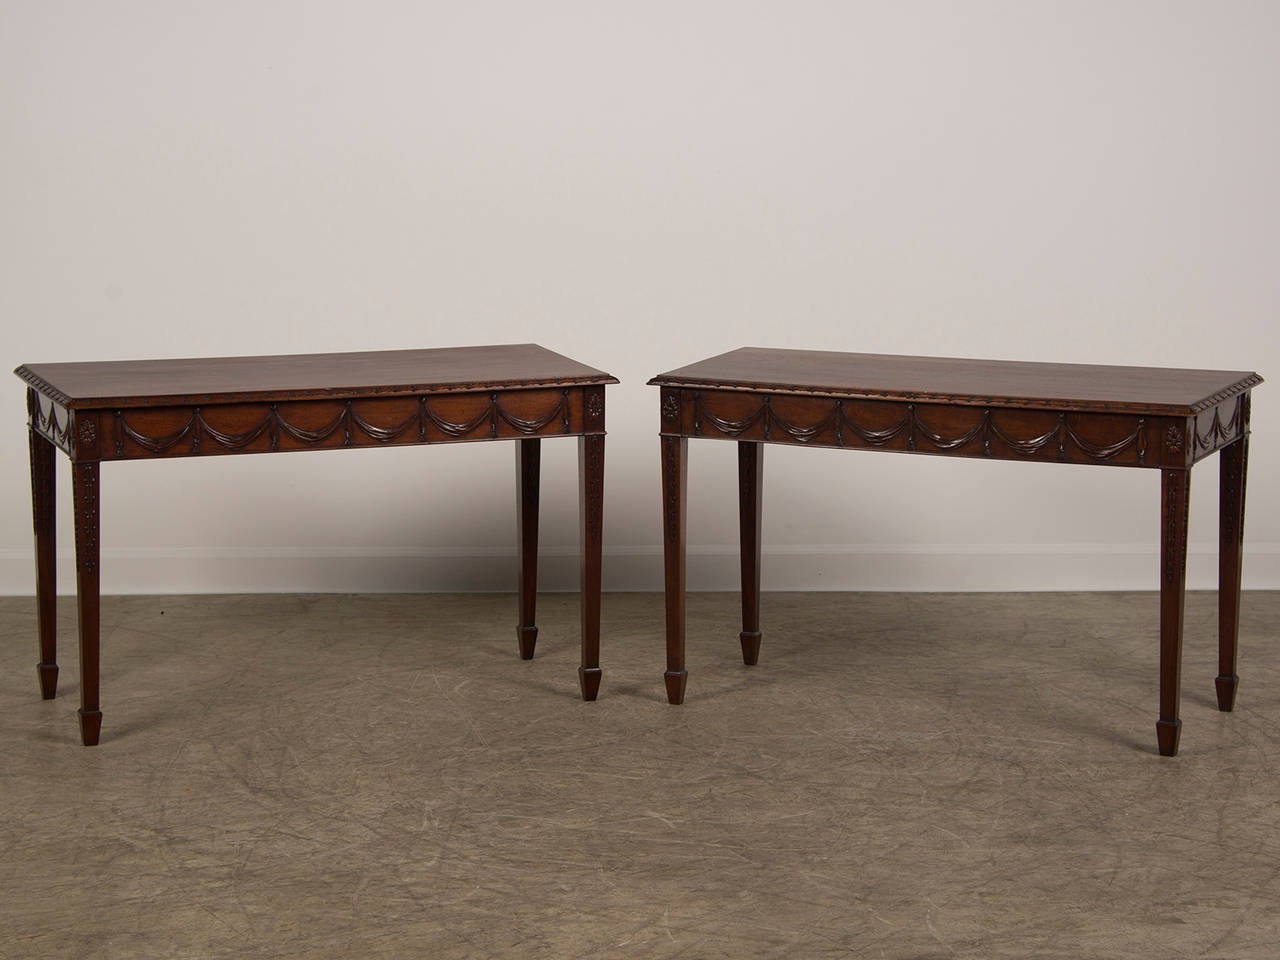 A pair of Adam style carved mahogany console tables from England c. 1850. Please notice the handsome carved details on each of these tables. The placement of the carving is visible not only from the front but also on each of the sides. Not only is